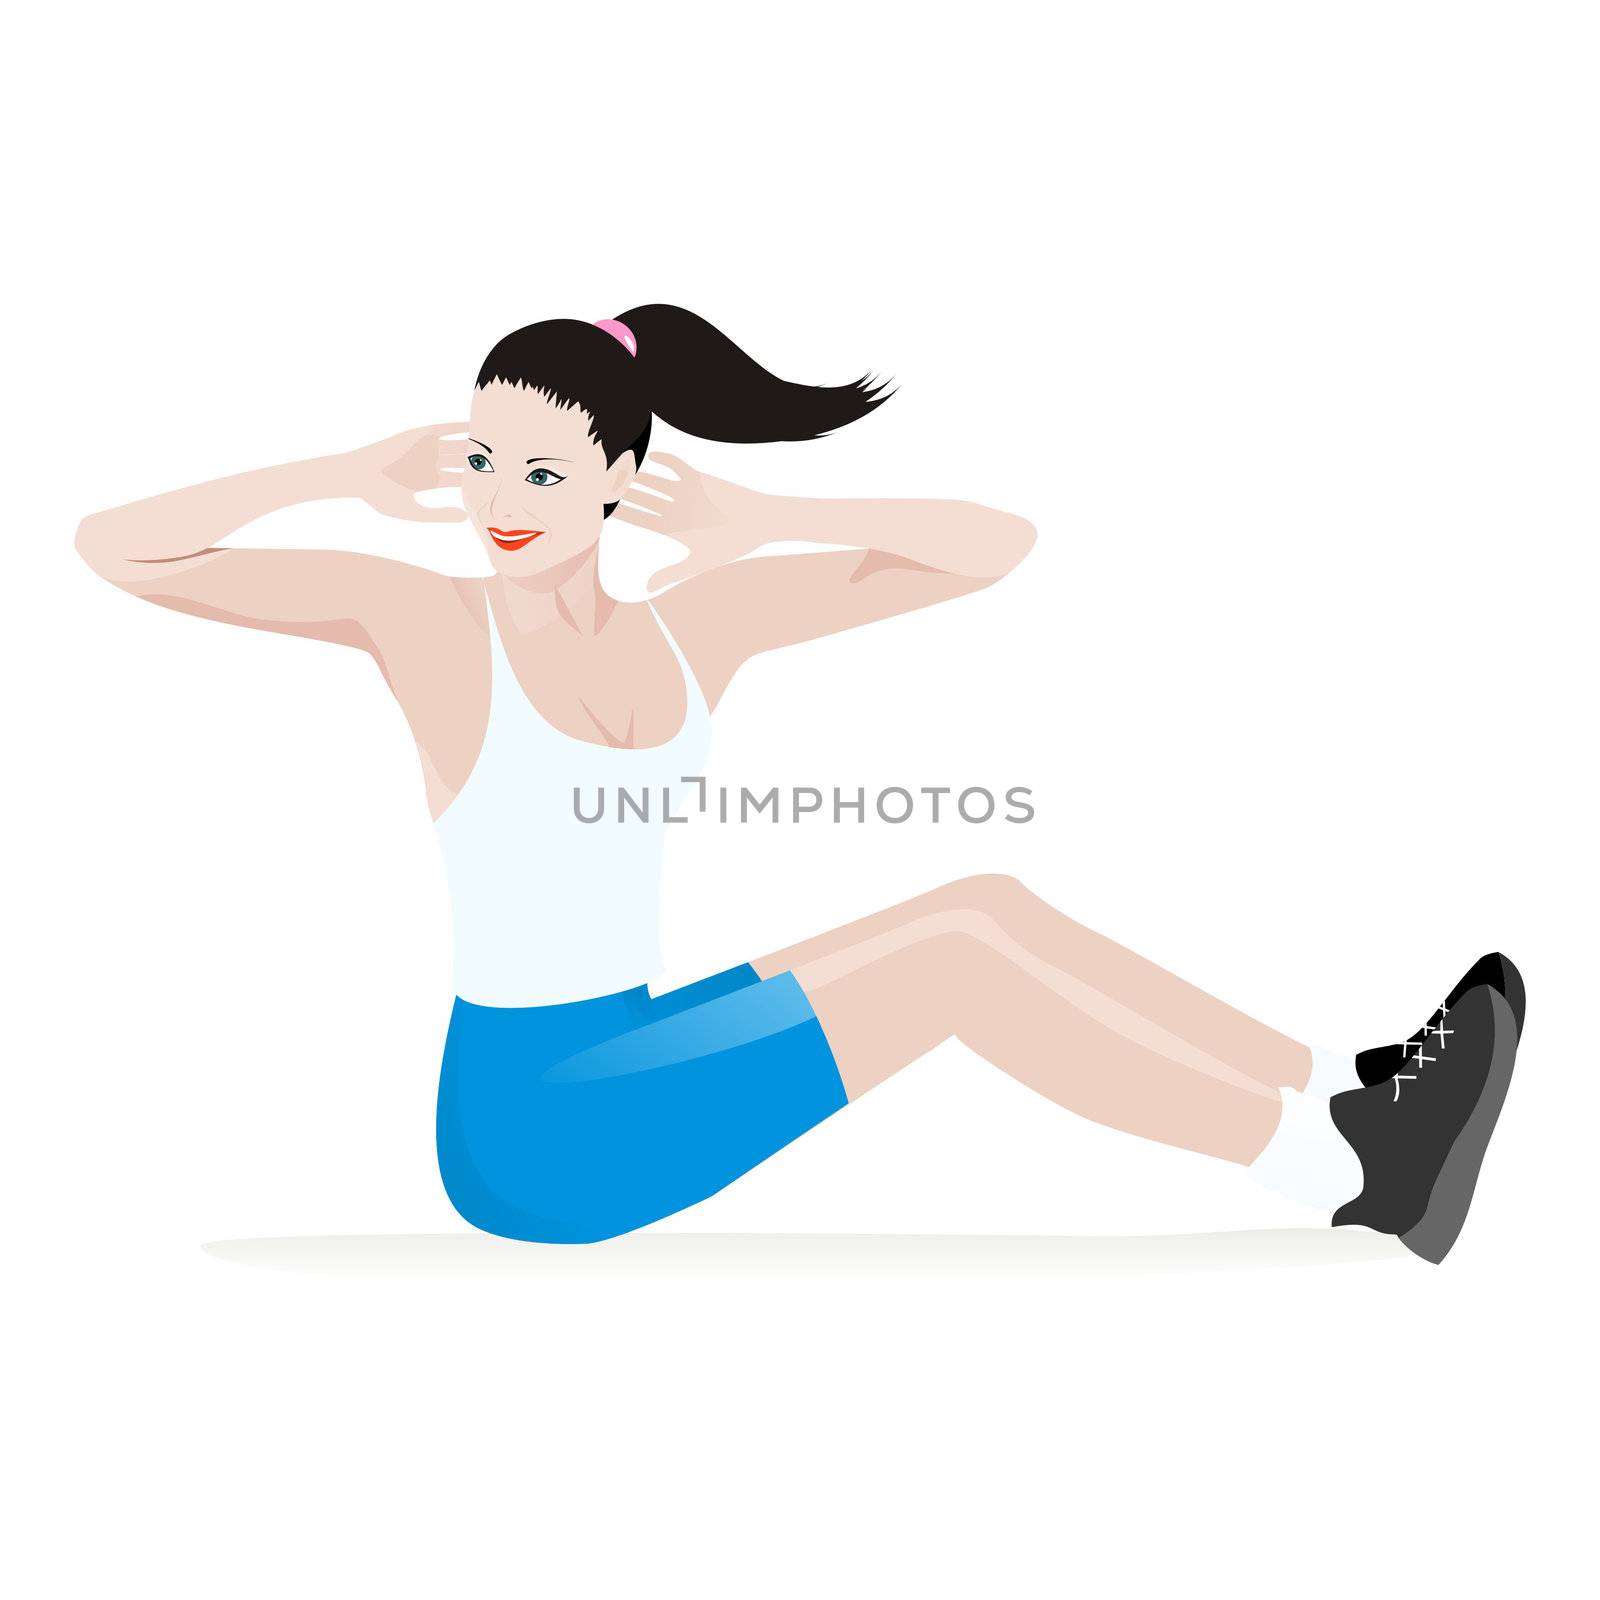 Vector illustration of a young attractive girl exercising